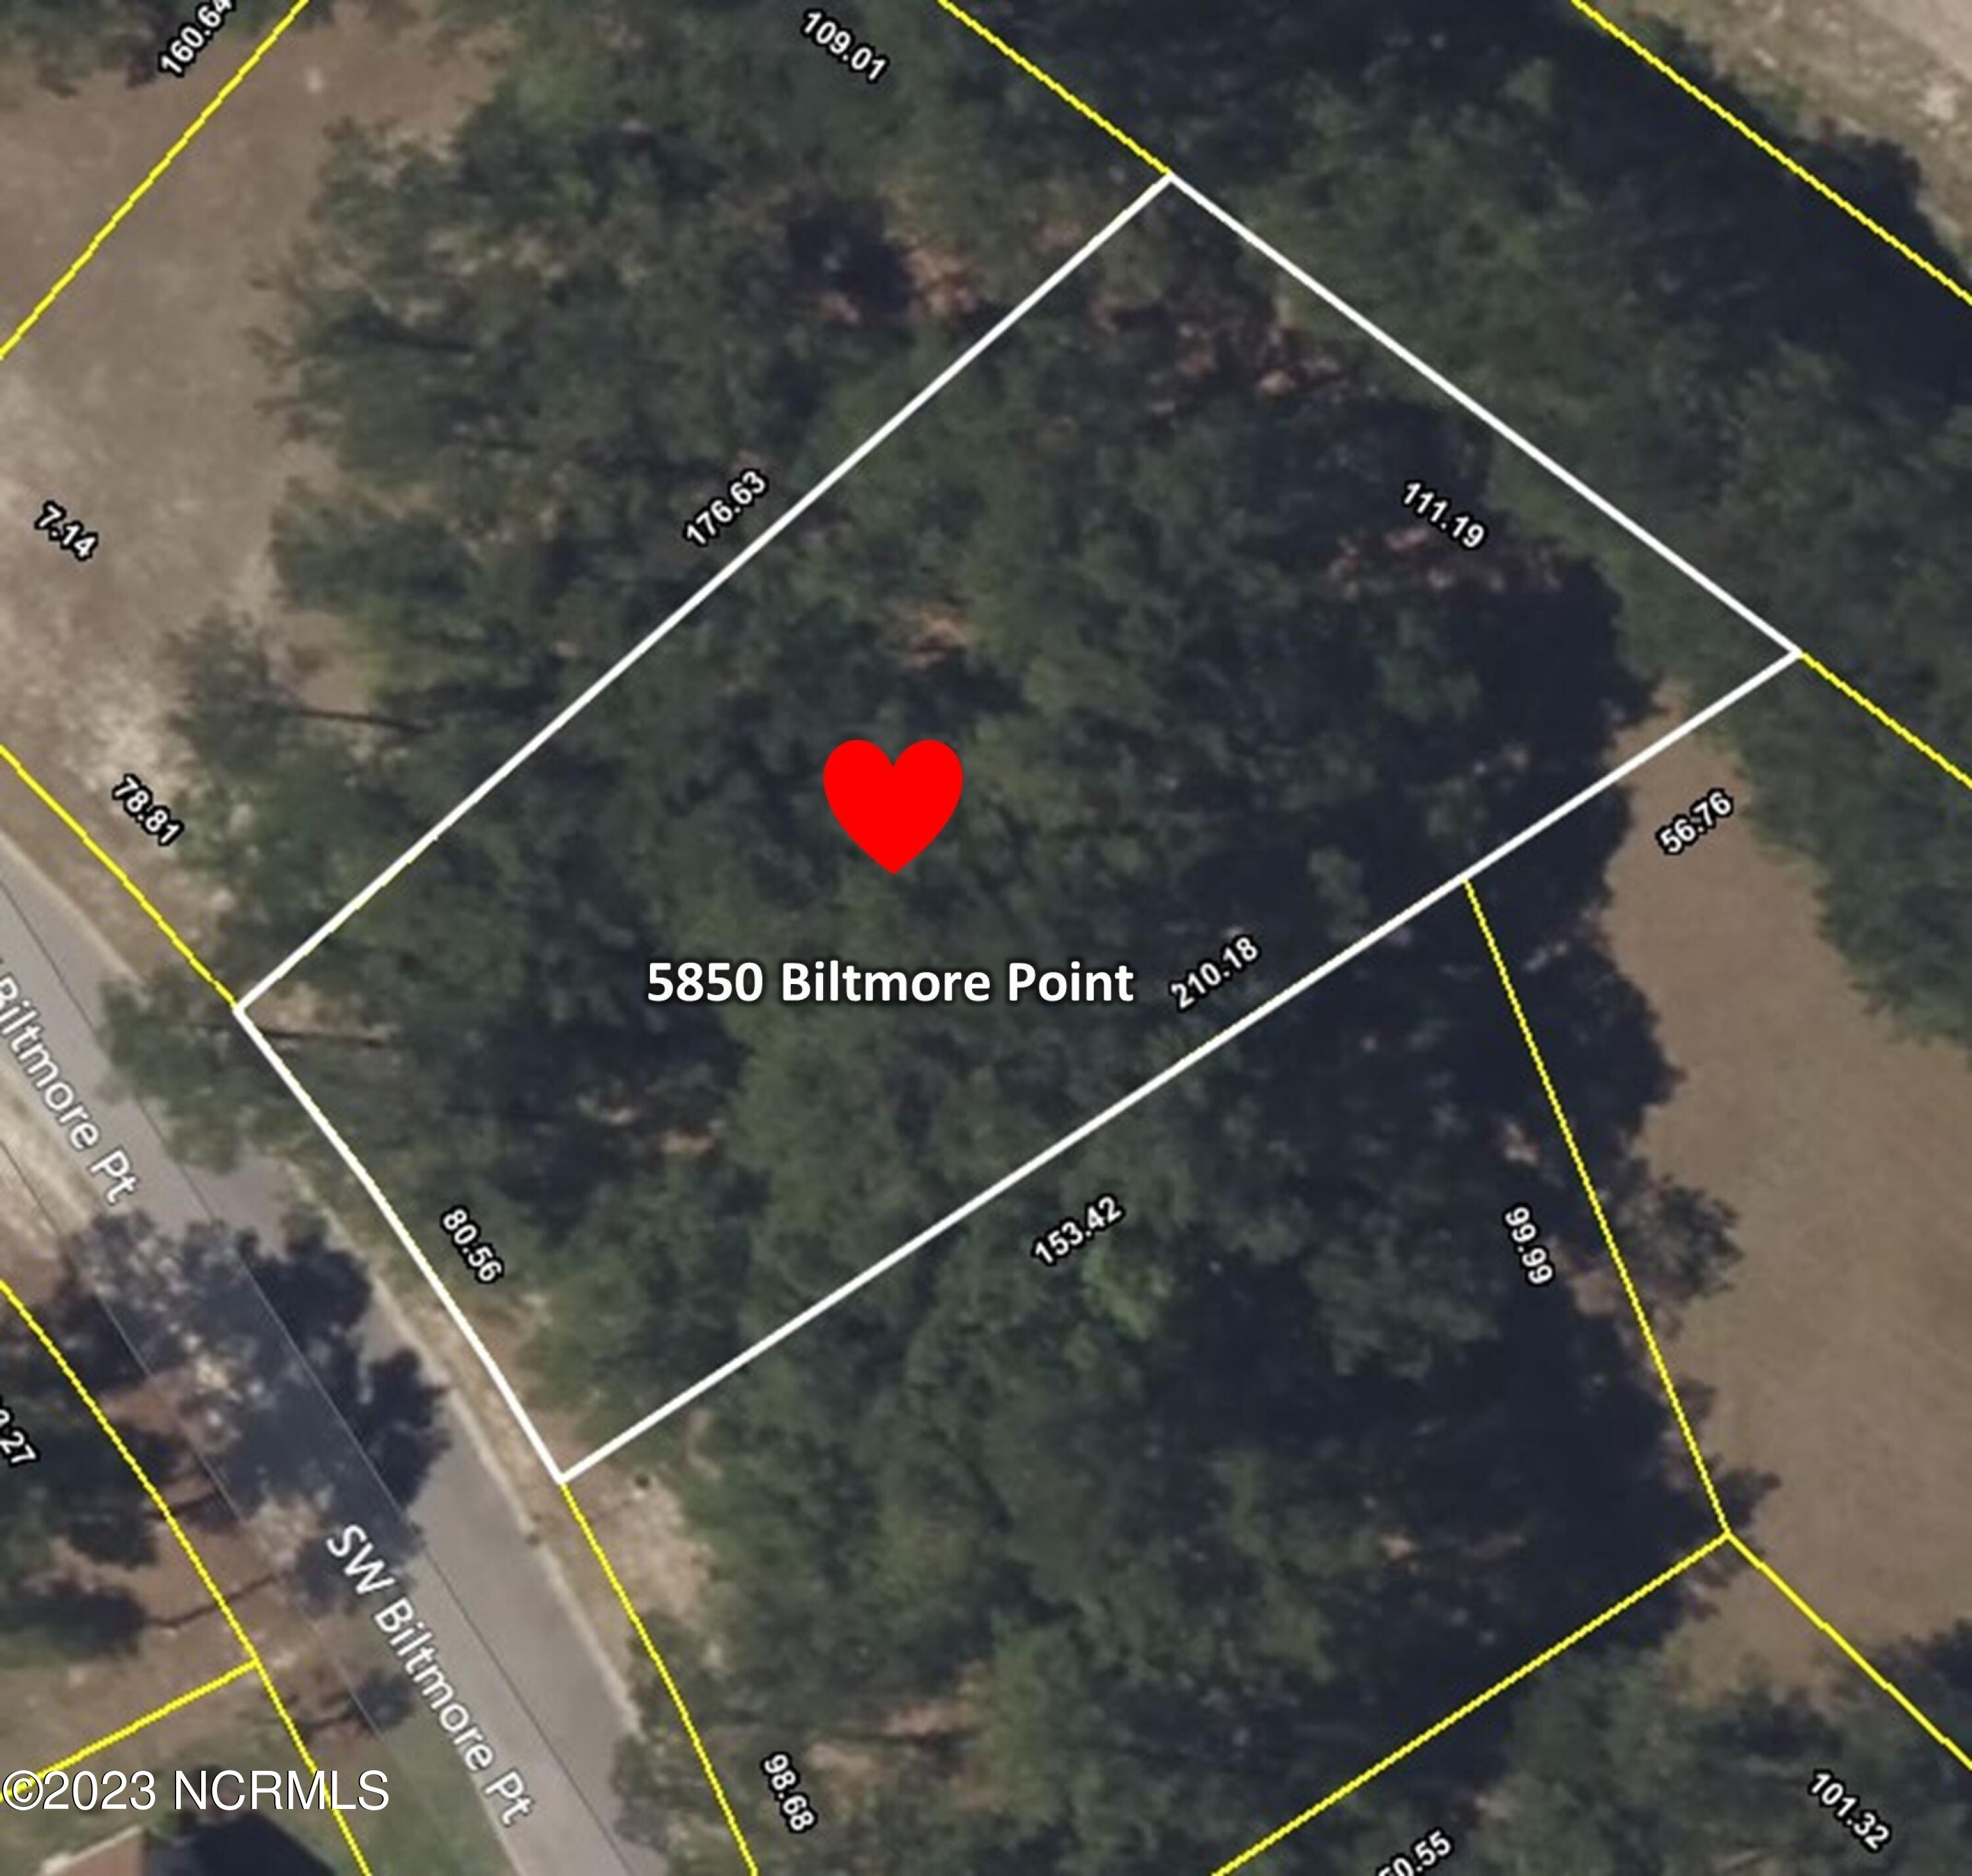 5850 Biltmore Point Aerial Map IV-5-28